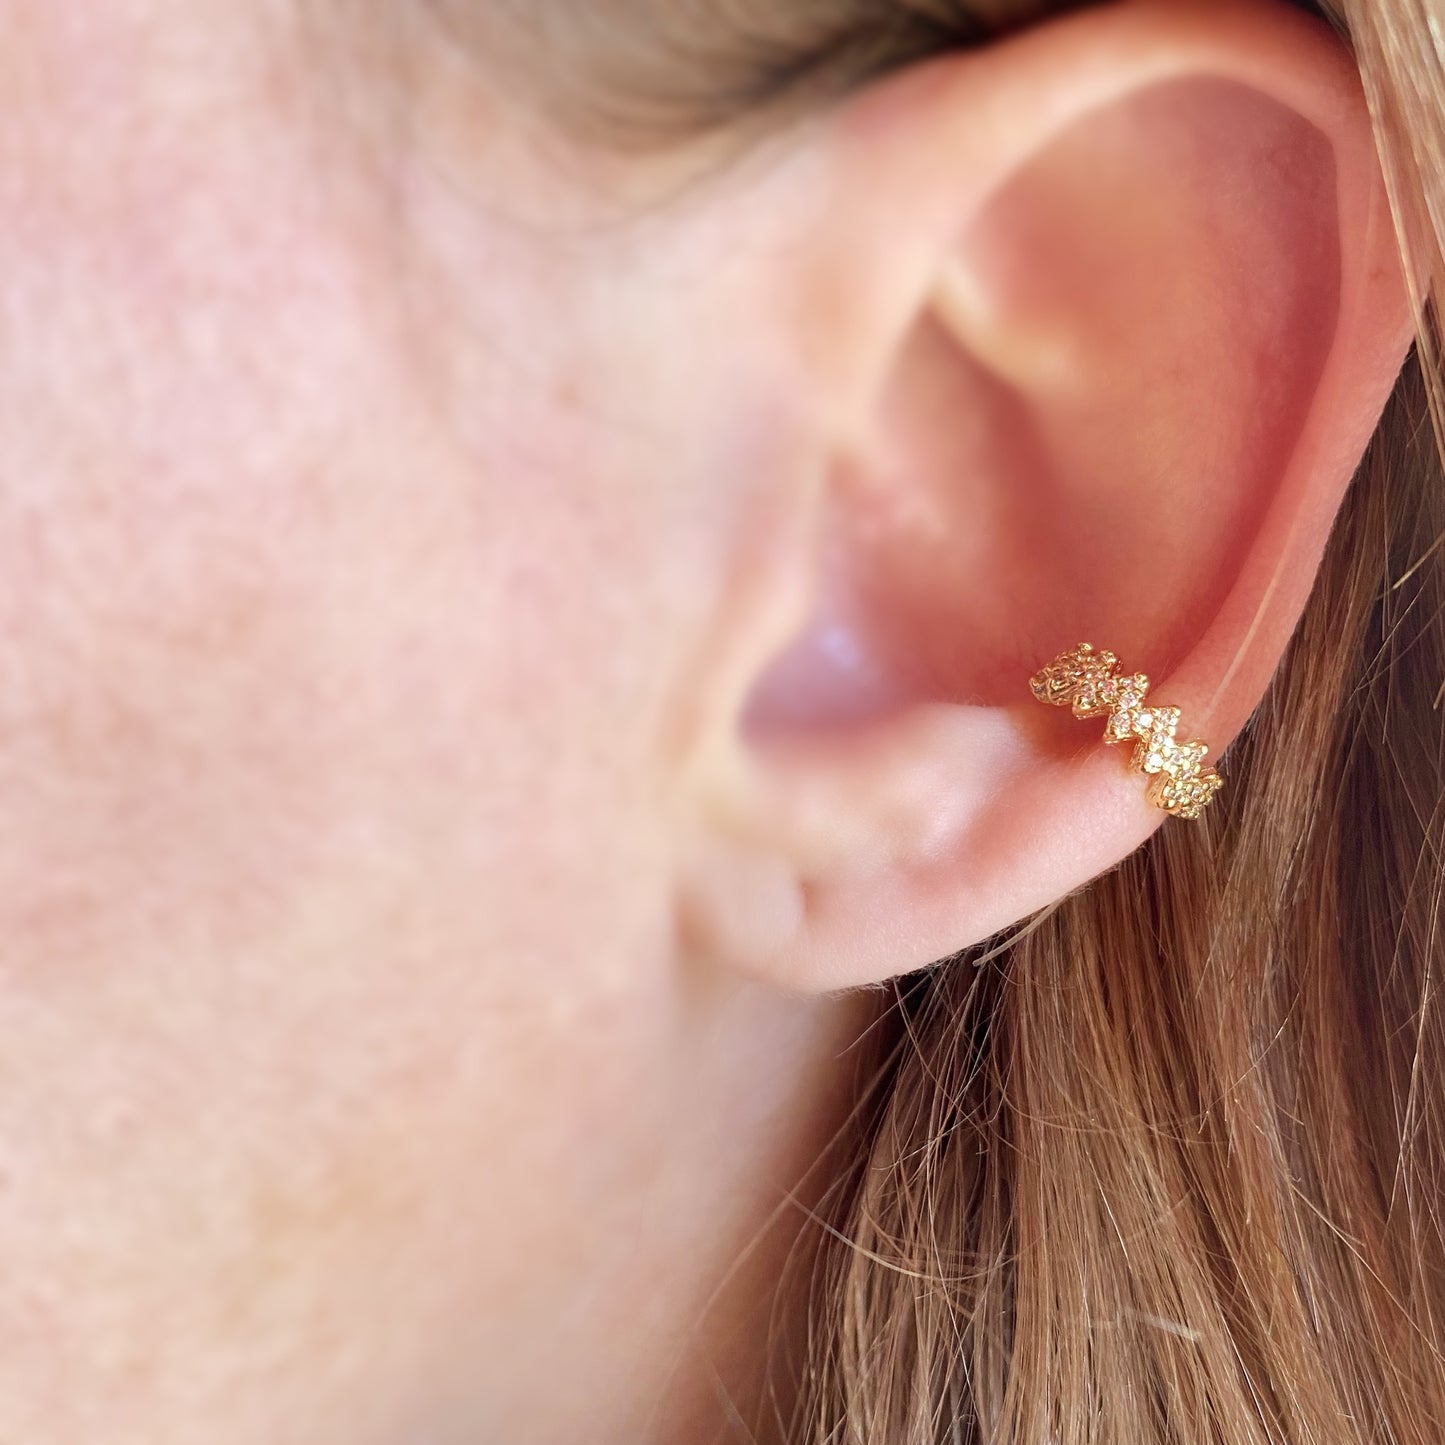 18k Gold Filled Zig Zag Ear Cuff With Cubic Zirconia Stones